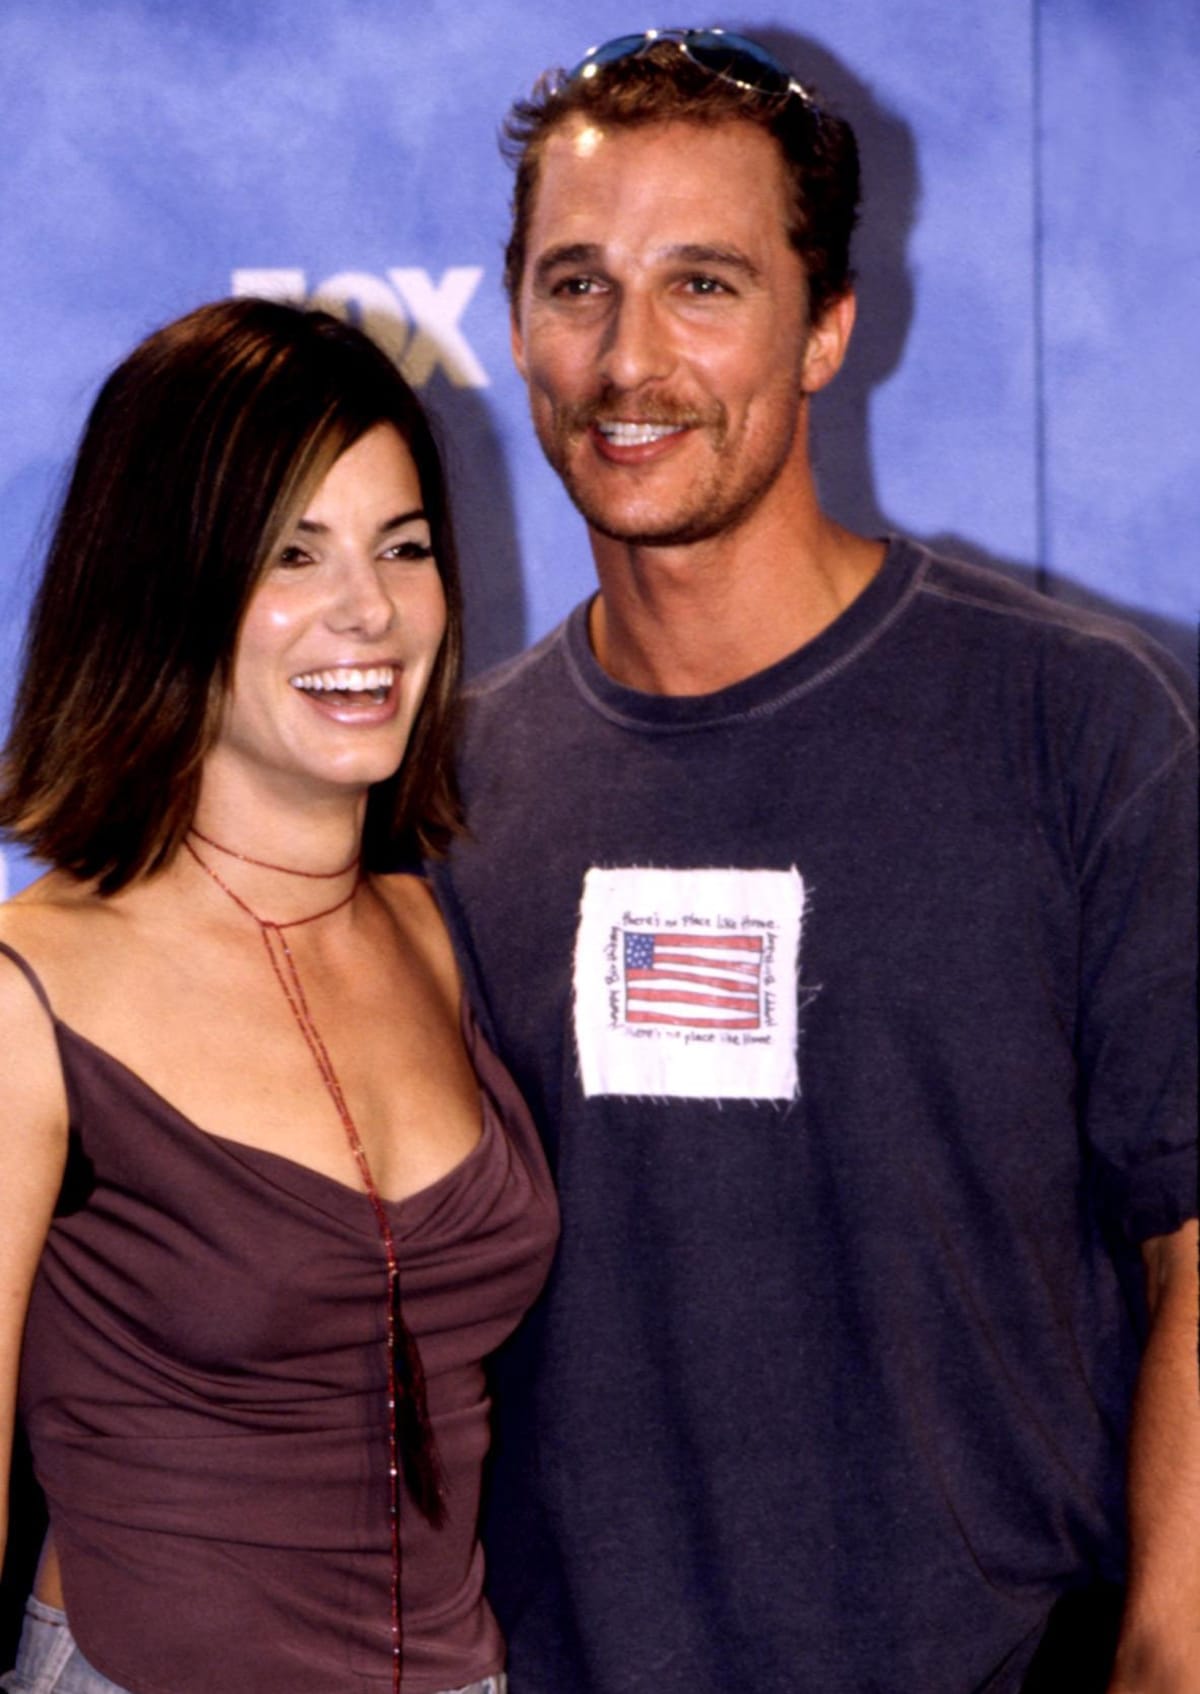 Sandra Bullock and Matthew McConaughey dated for about two years after meeting on the set of A Time to Kill in 1996